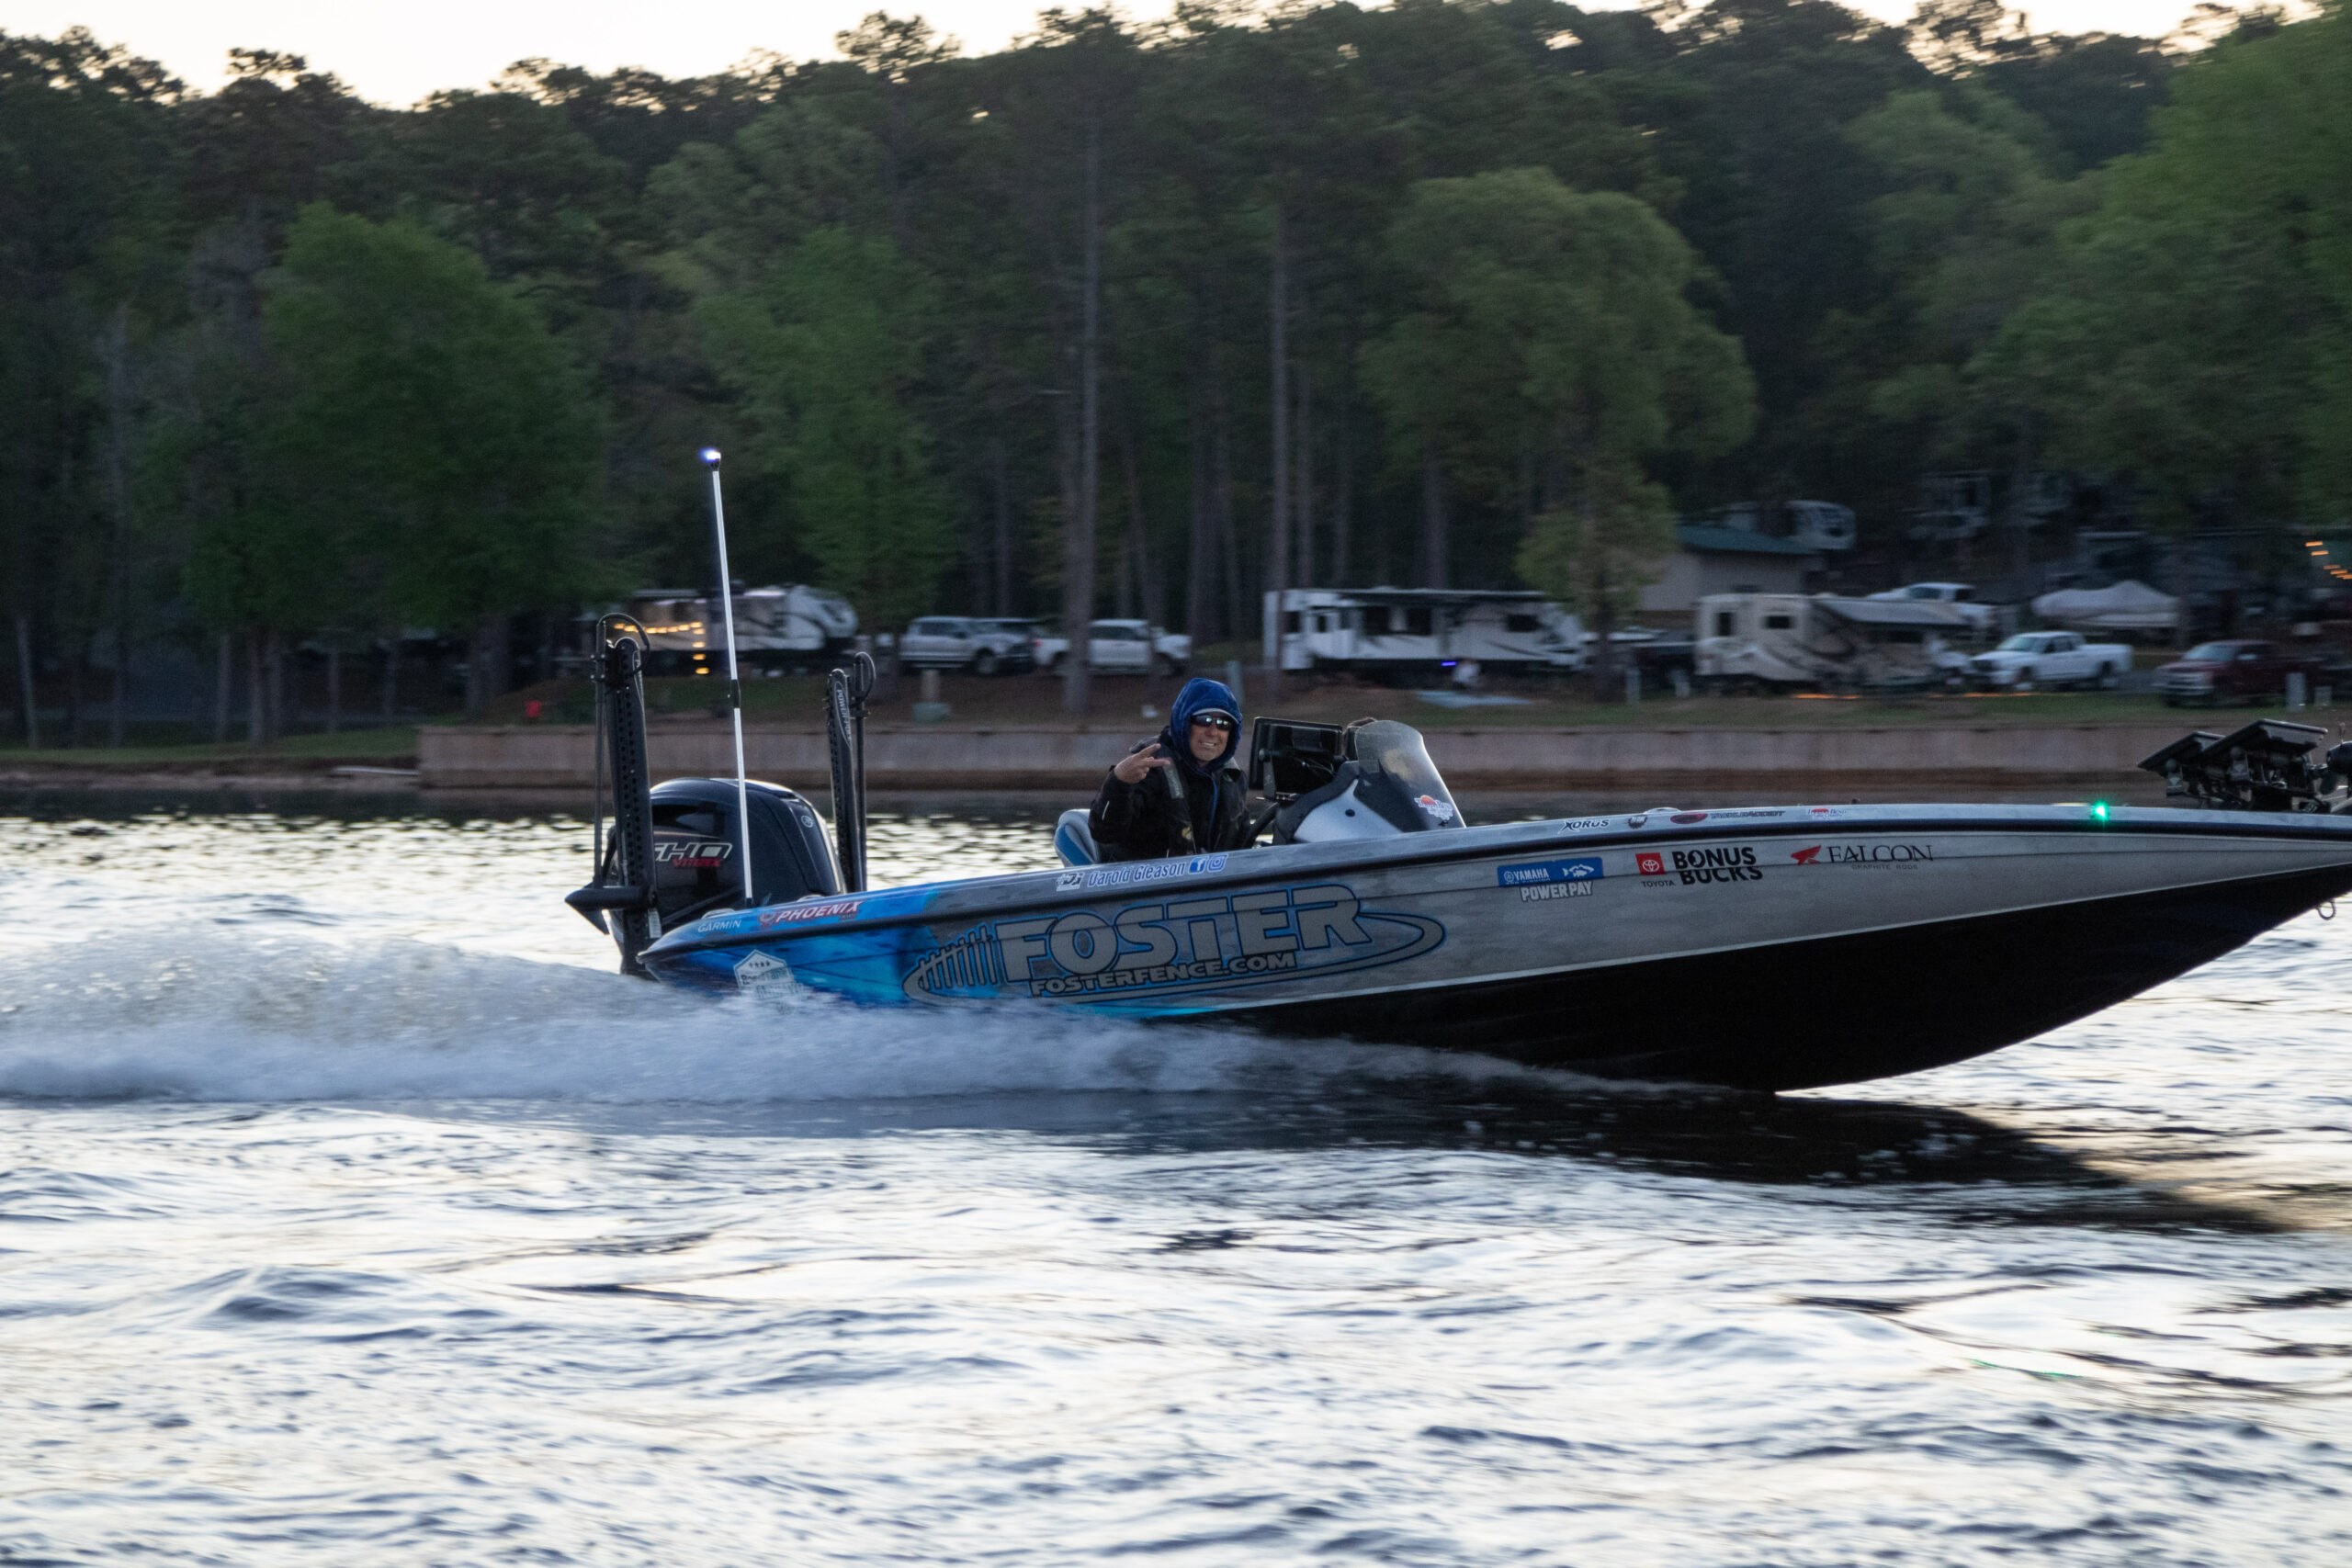 GALLERY: Rolling out on Championship Thursday at Toledo Bend